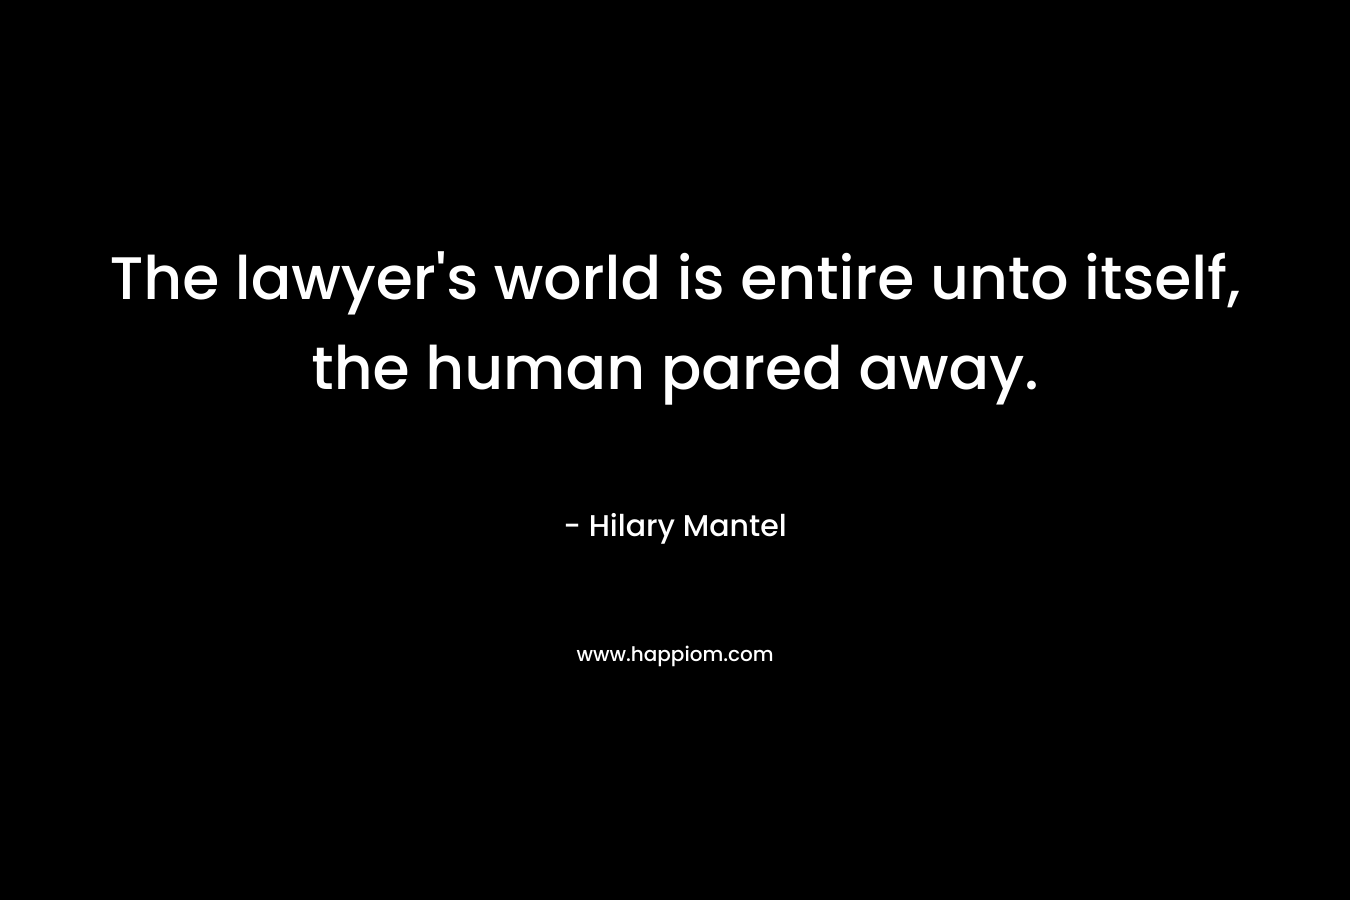 The lawyer’s world is entire unto itself, the human pared away. – Hilary Mantel